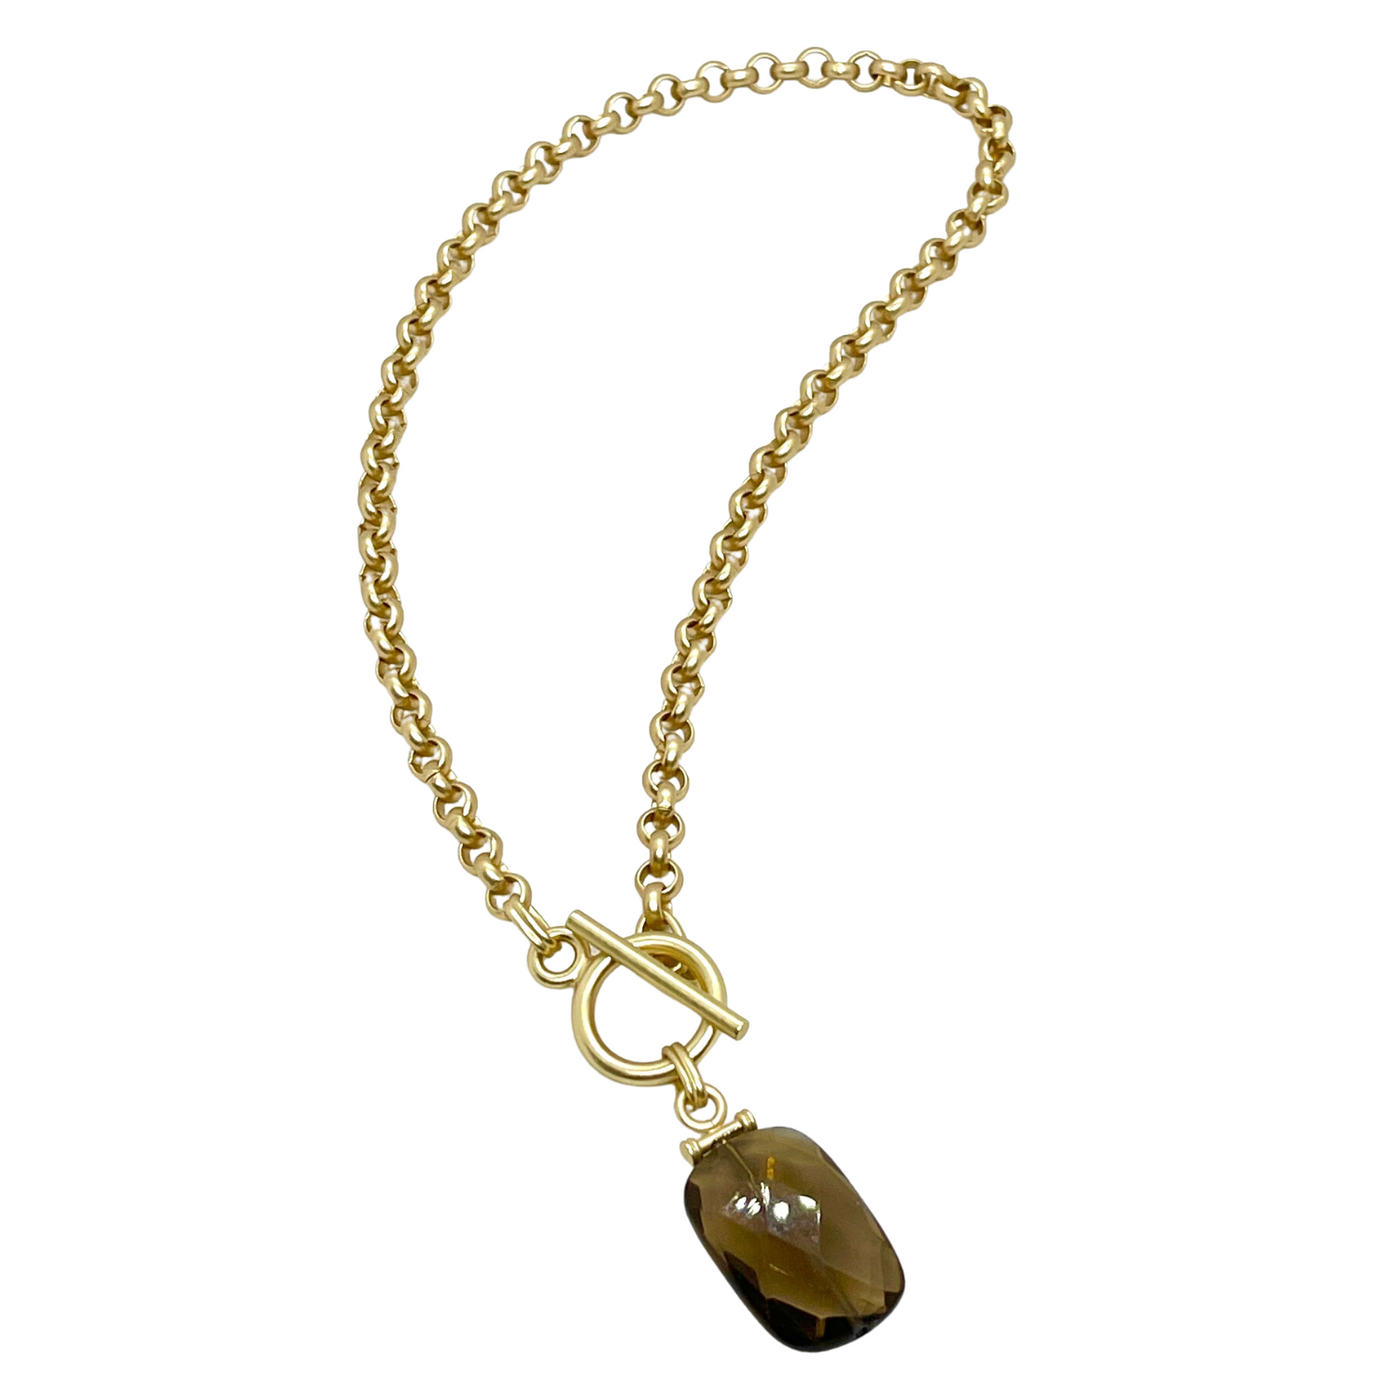 Matte Gold Rolo Chain Necklace with Smoke Topaz Pendant